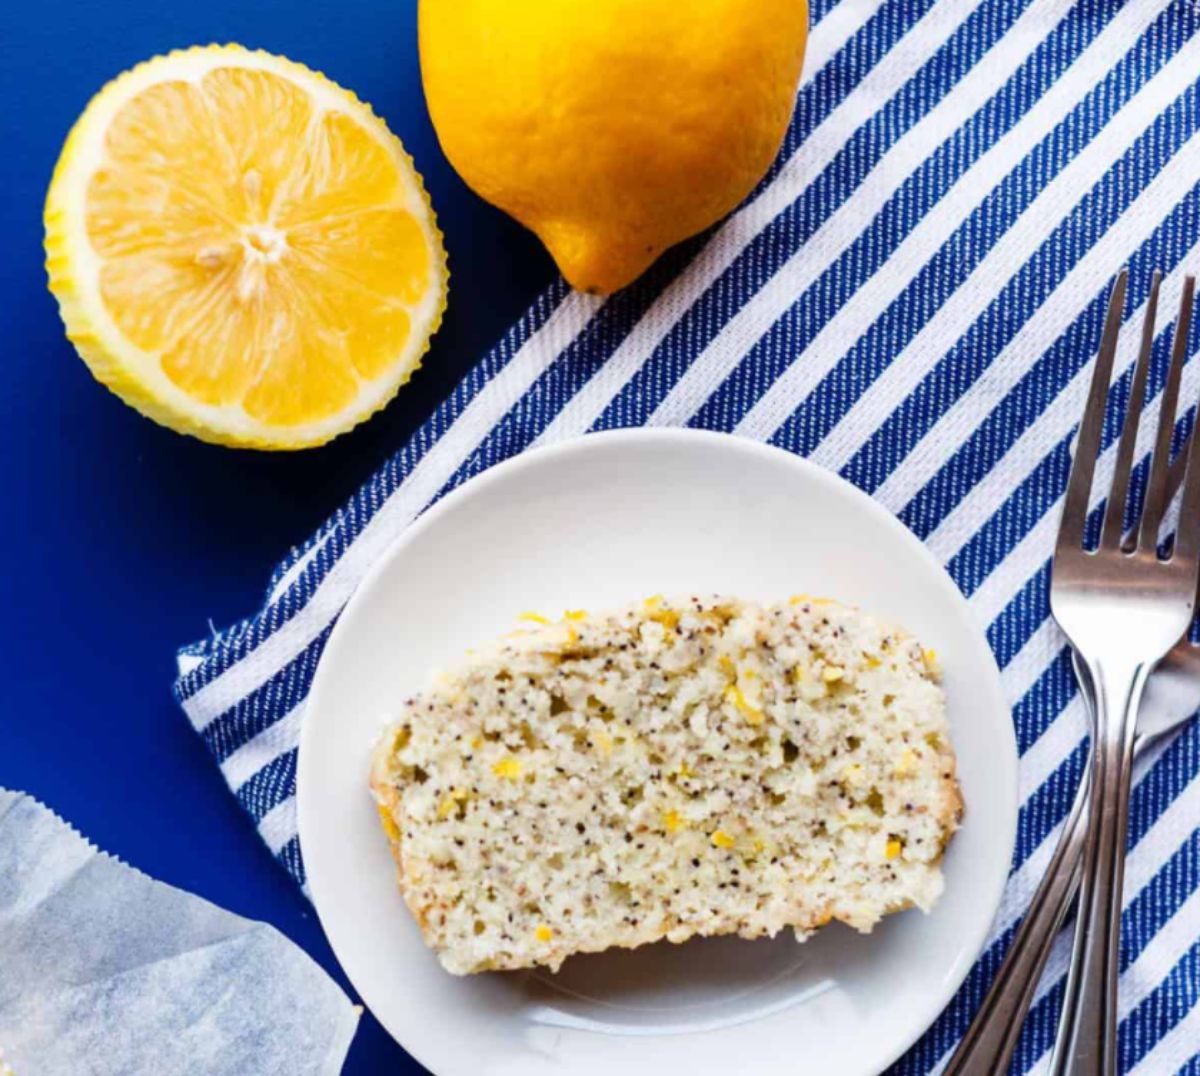 on a striped blue cloth is a white plate with a slice of lemon and poppy seed cake on it. A fork sits next to it and 2 lemons behind